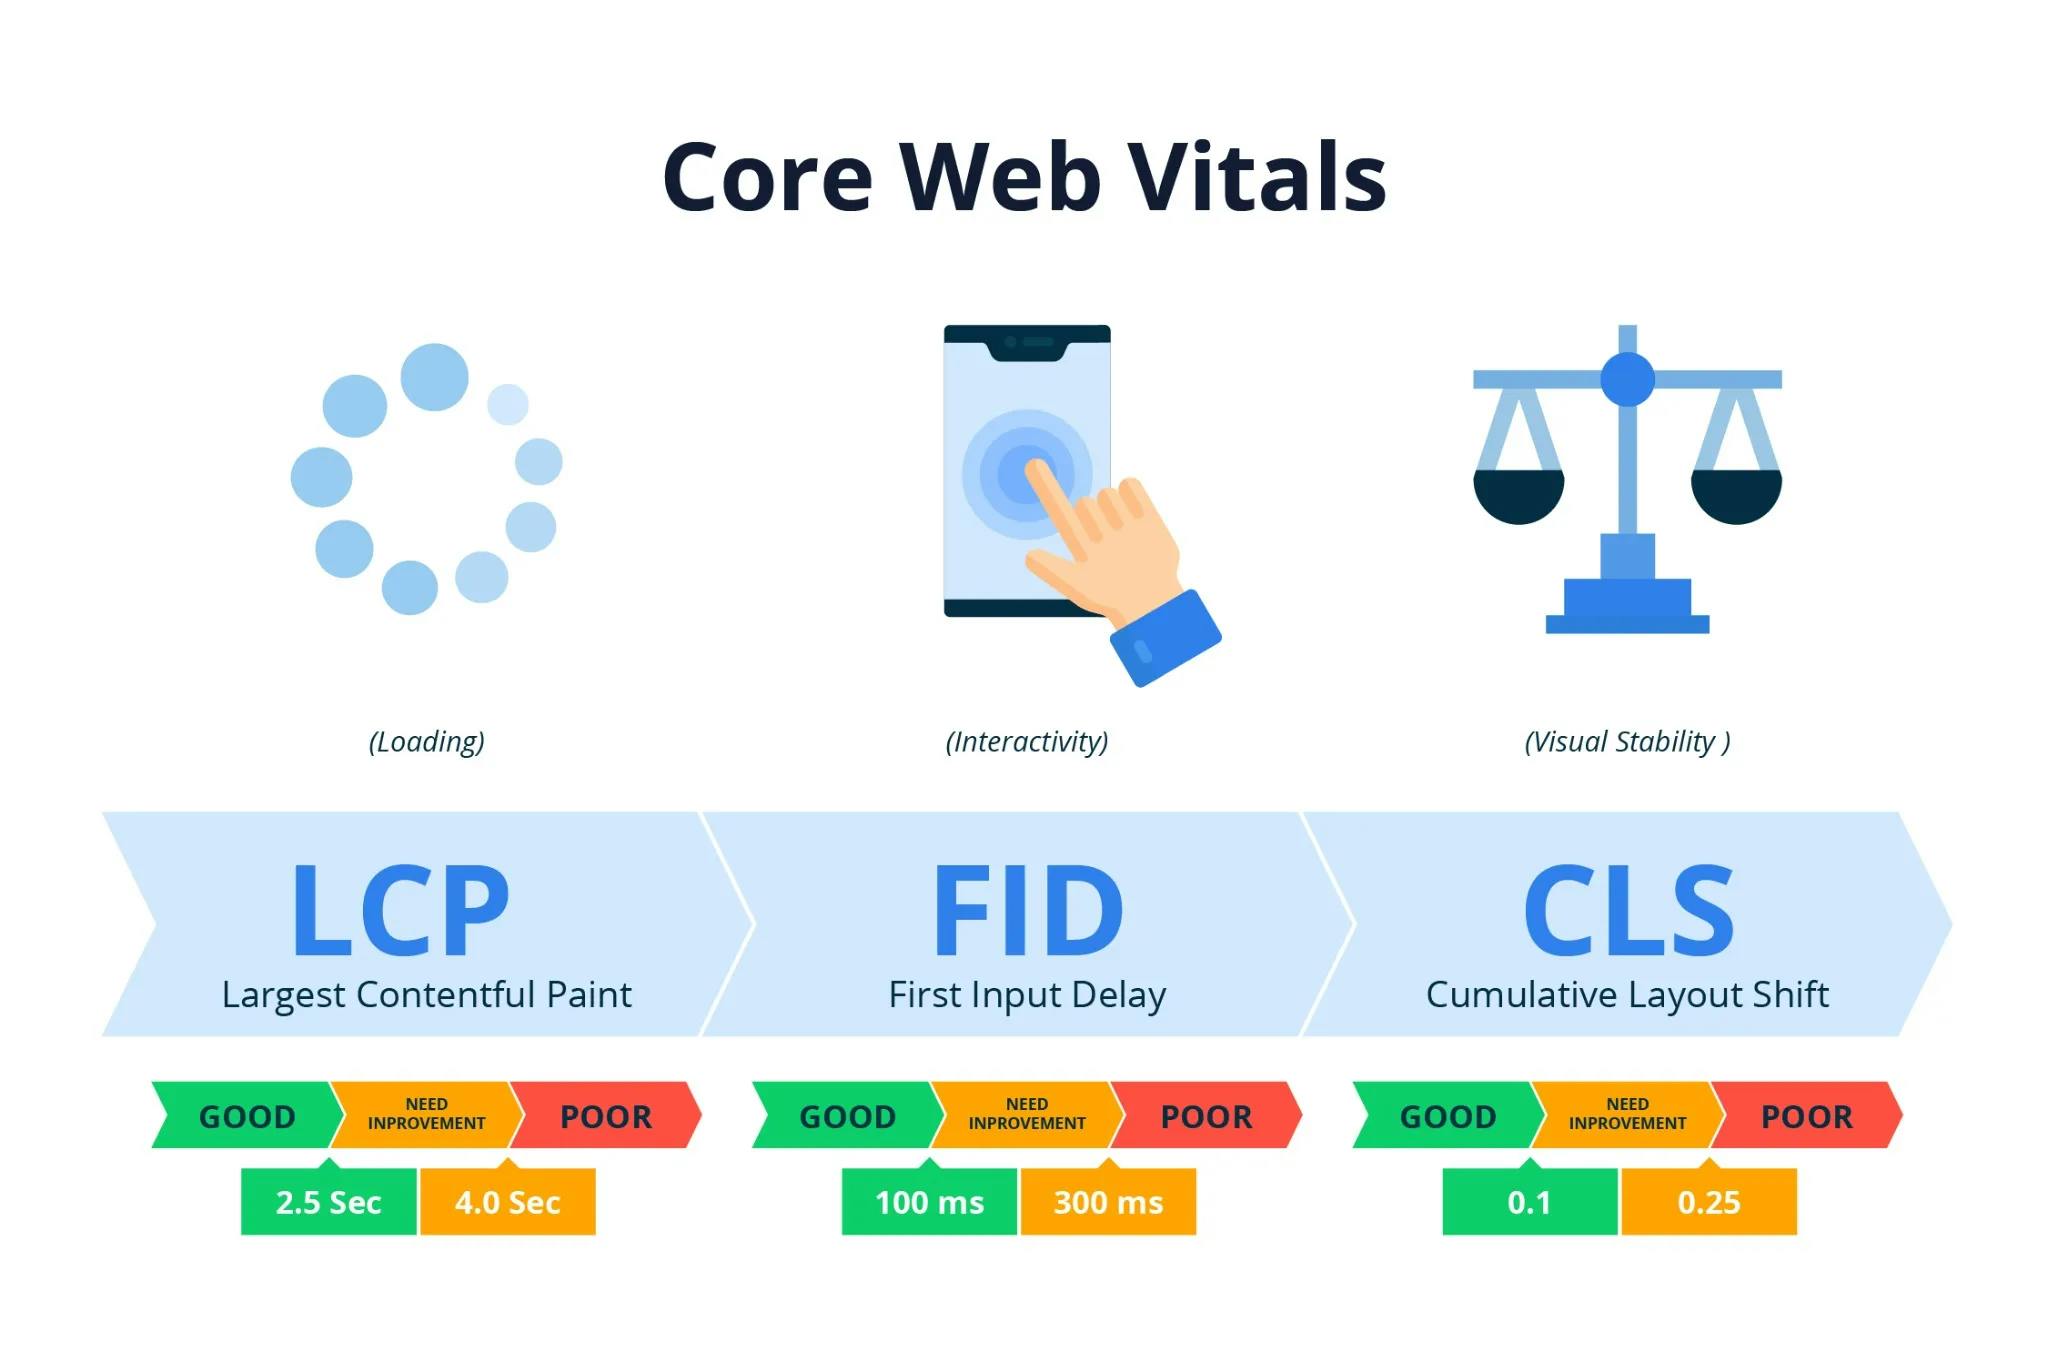 Why Should You Use Core Web Vitals in Your WebSite